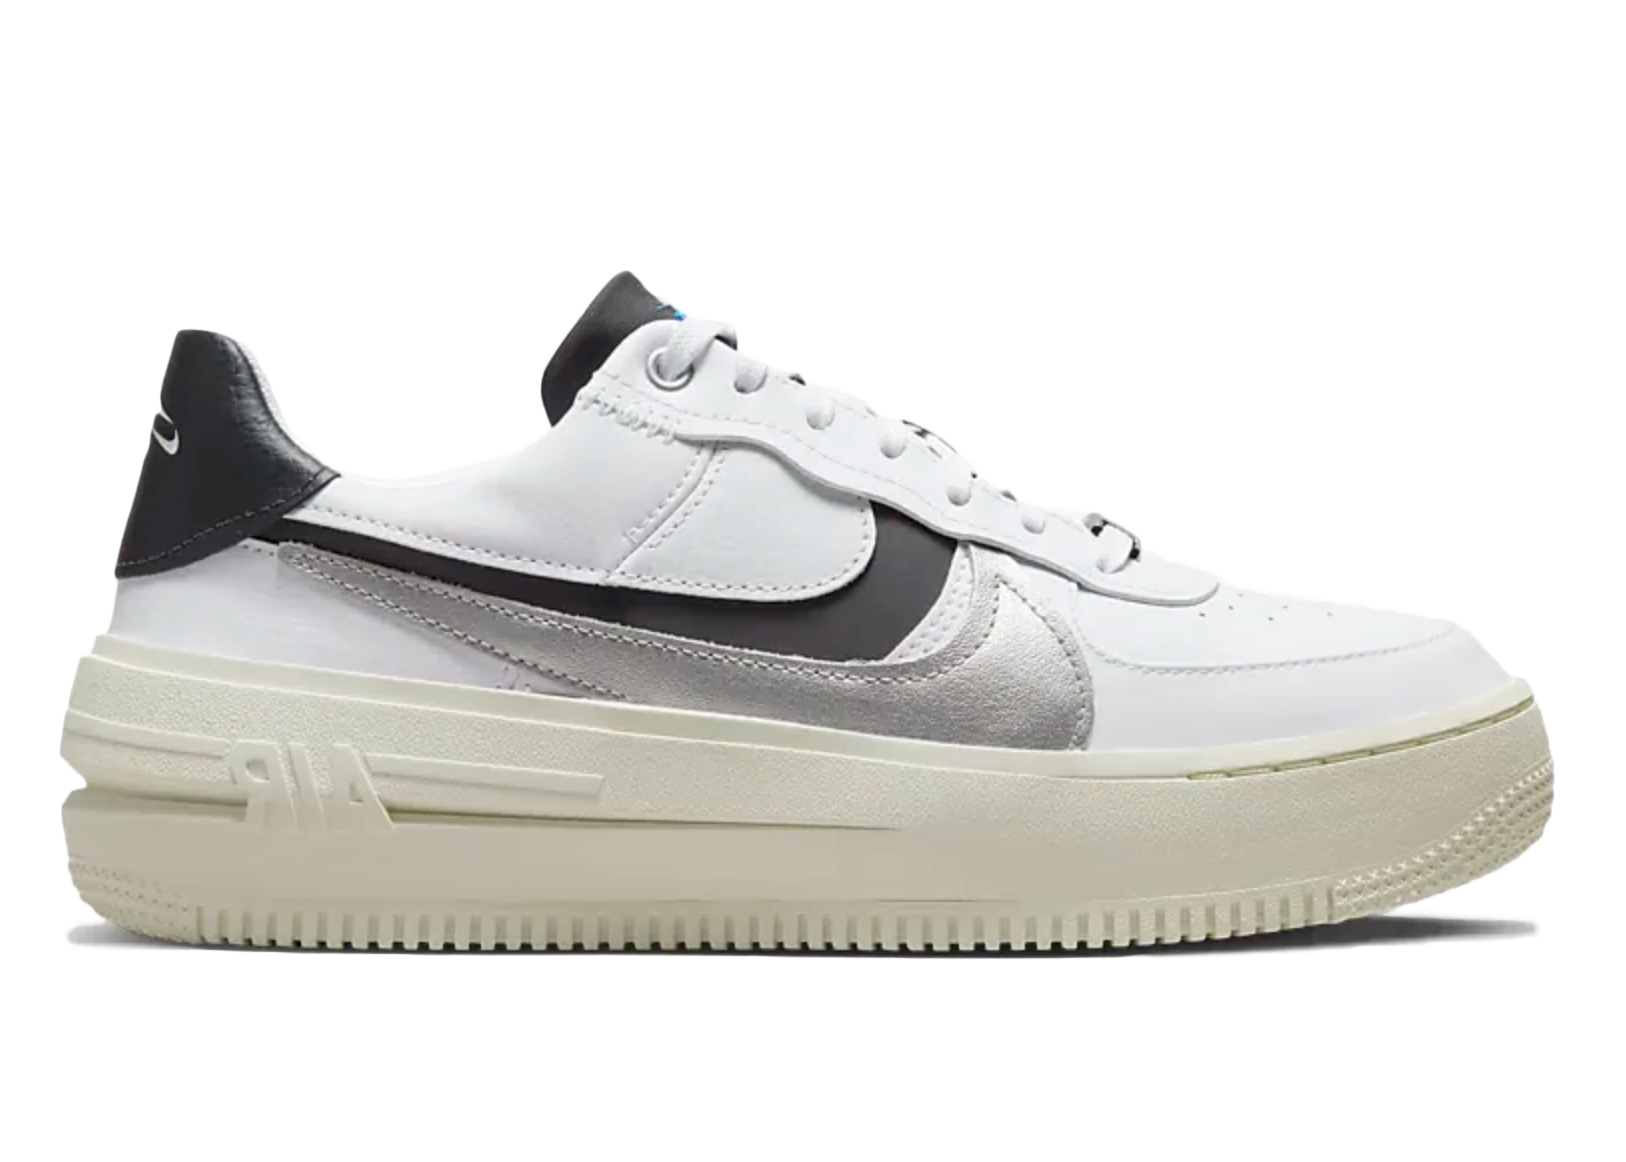 NIKE AIR FORCE 1 CHAMP PACK SILVER